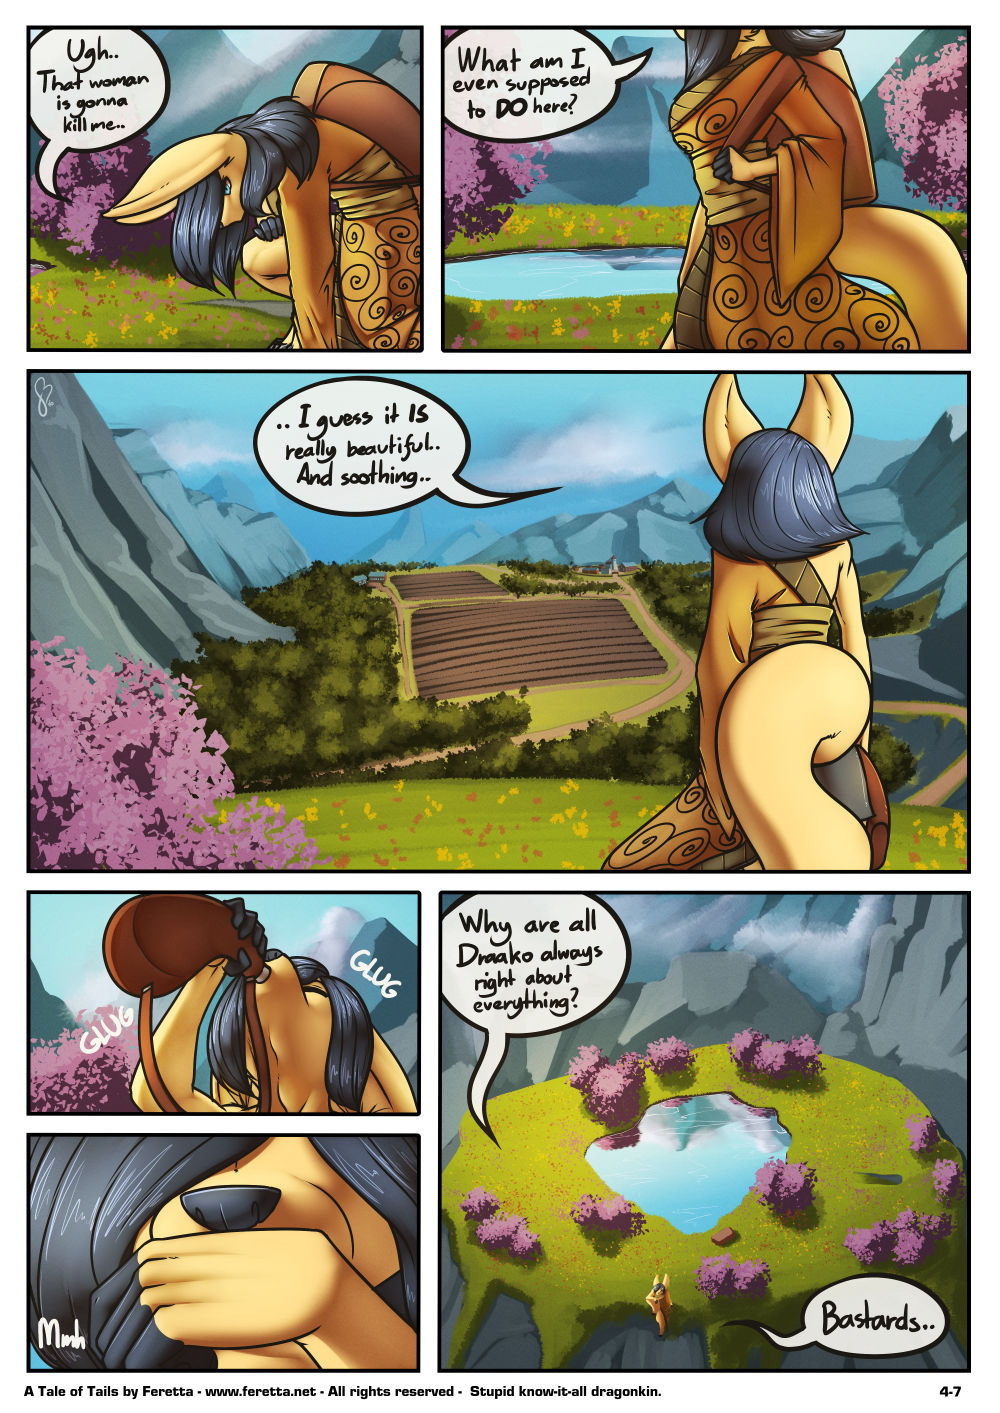 A Tale of Tails 4 - Matters of the mind - Page 7